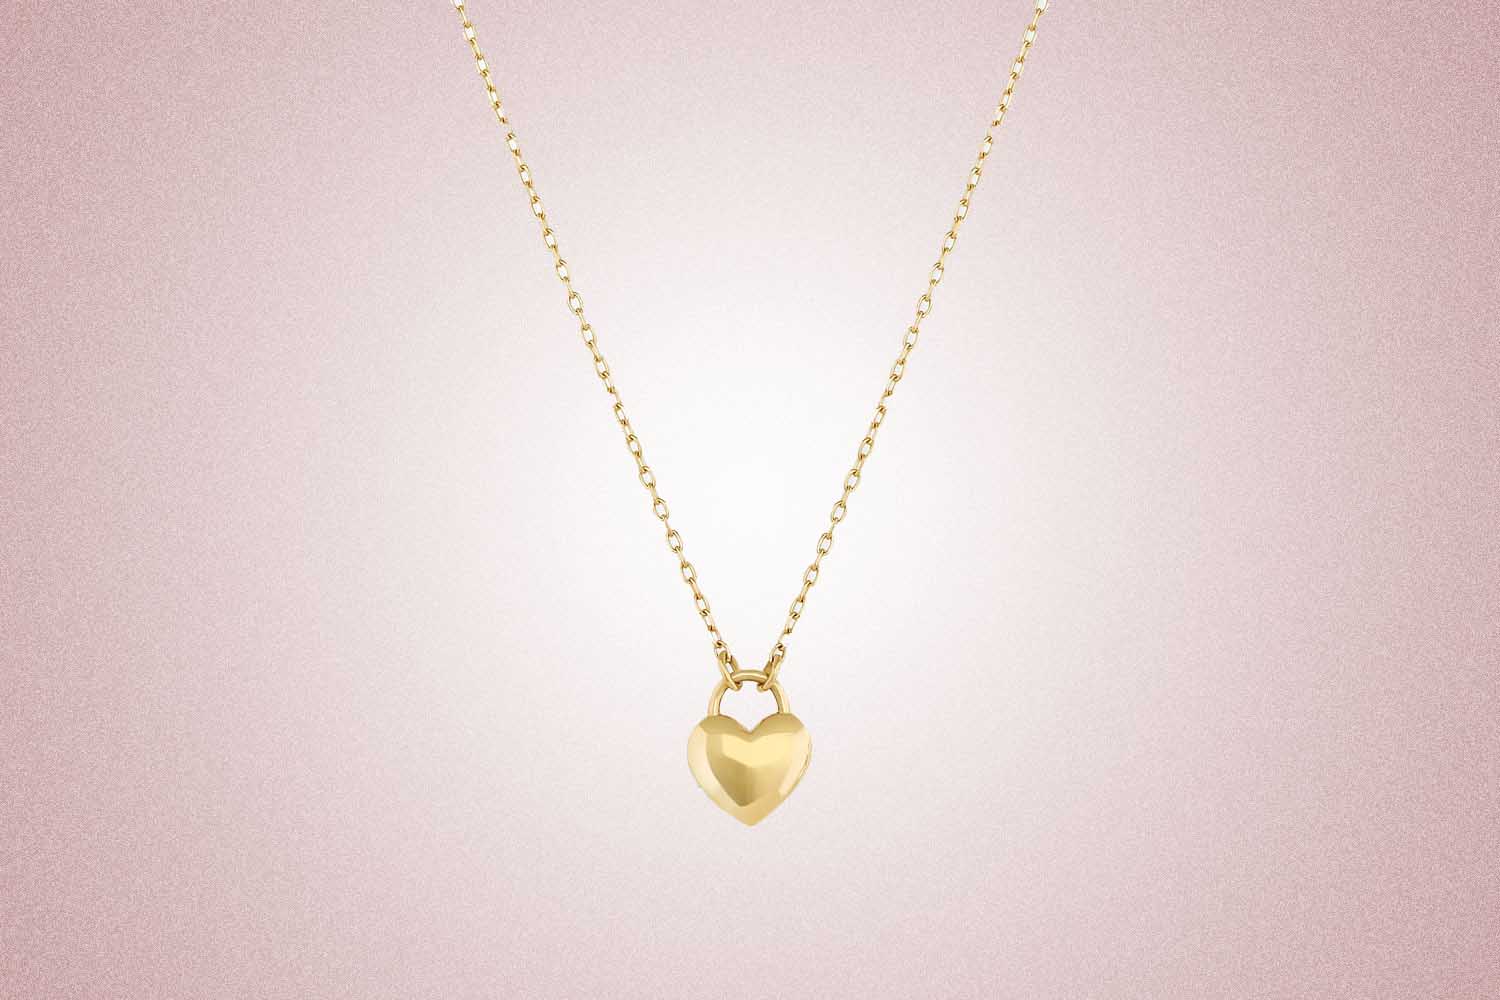 A gold sweetheart padlock charm necklace, a perfect valentine's day gift, on a pink background